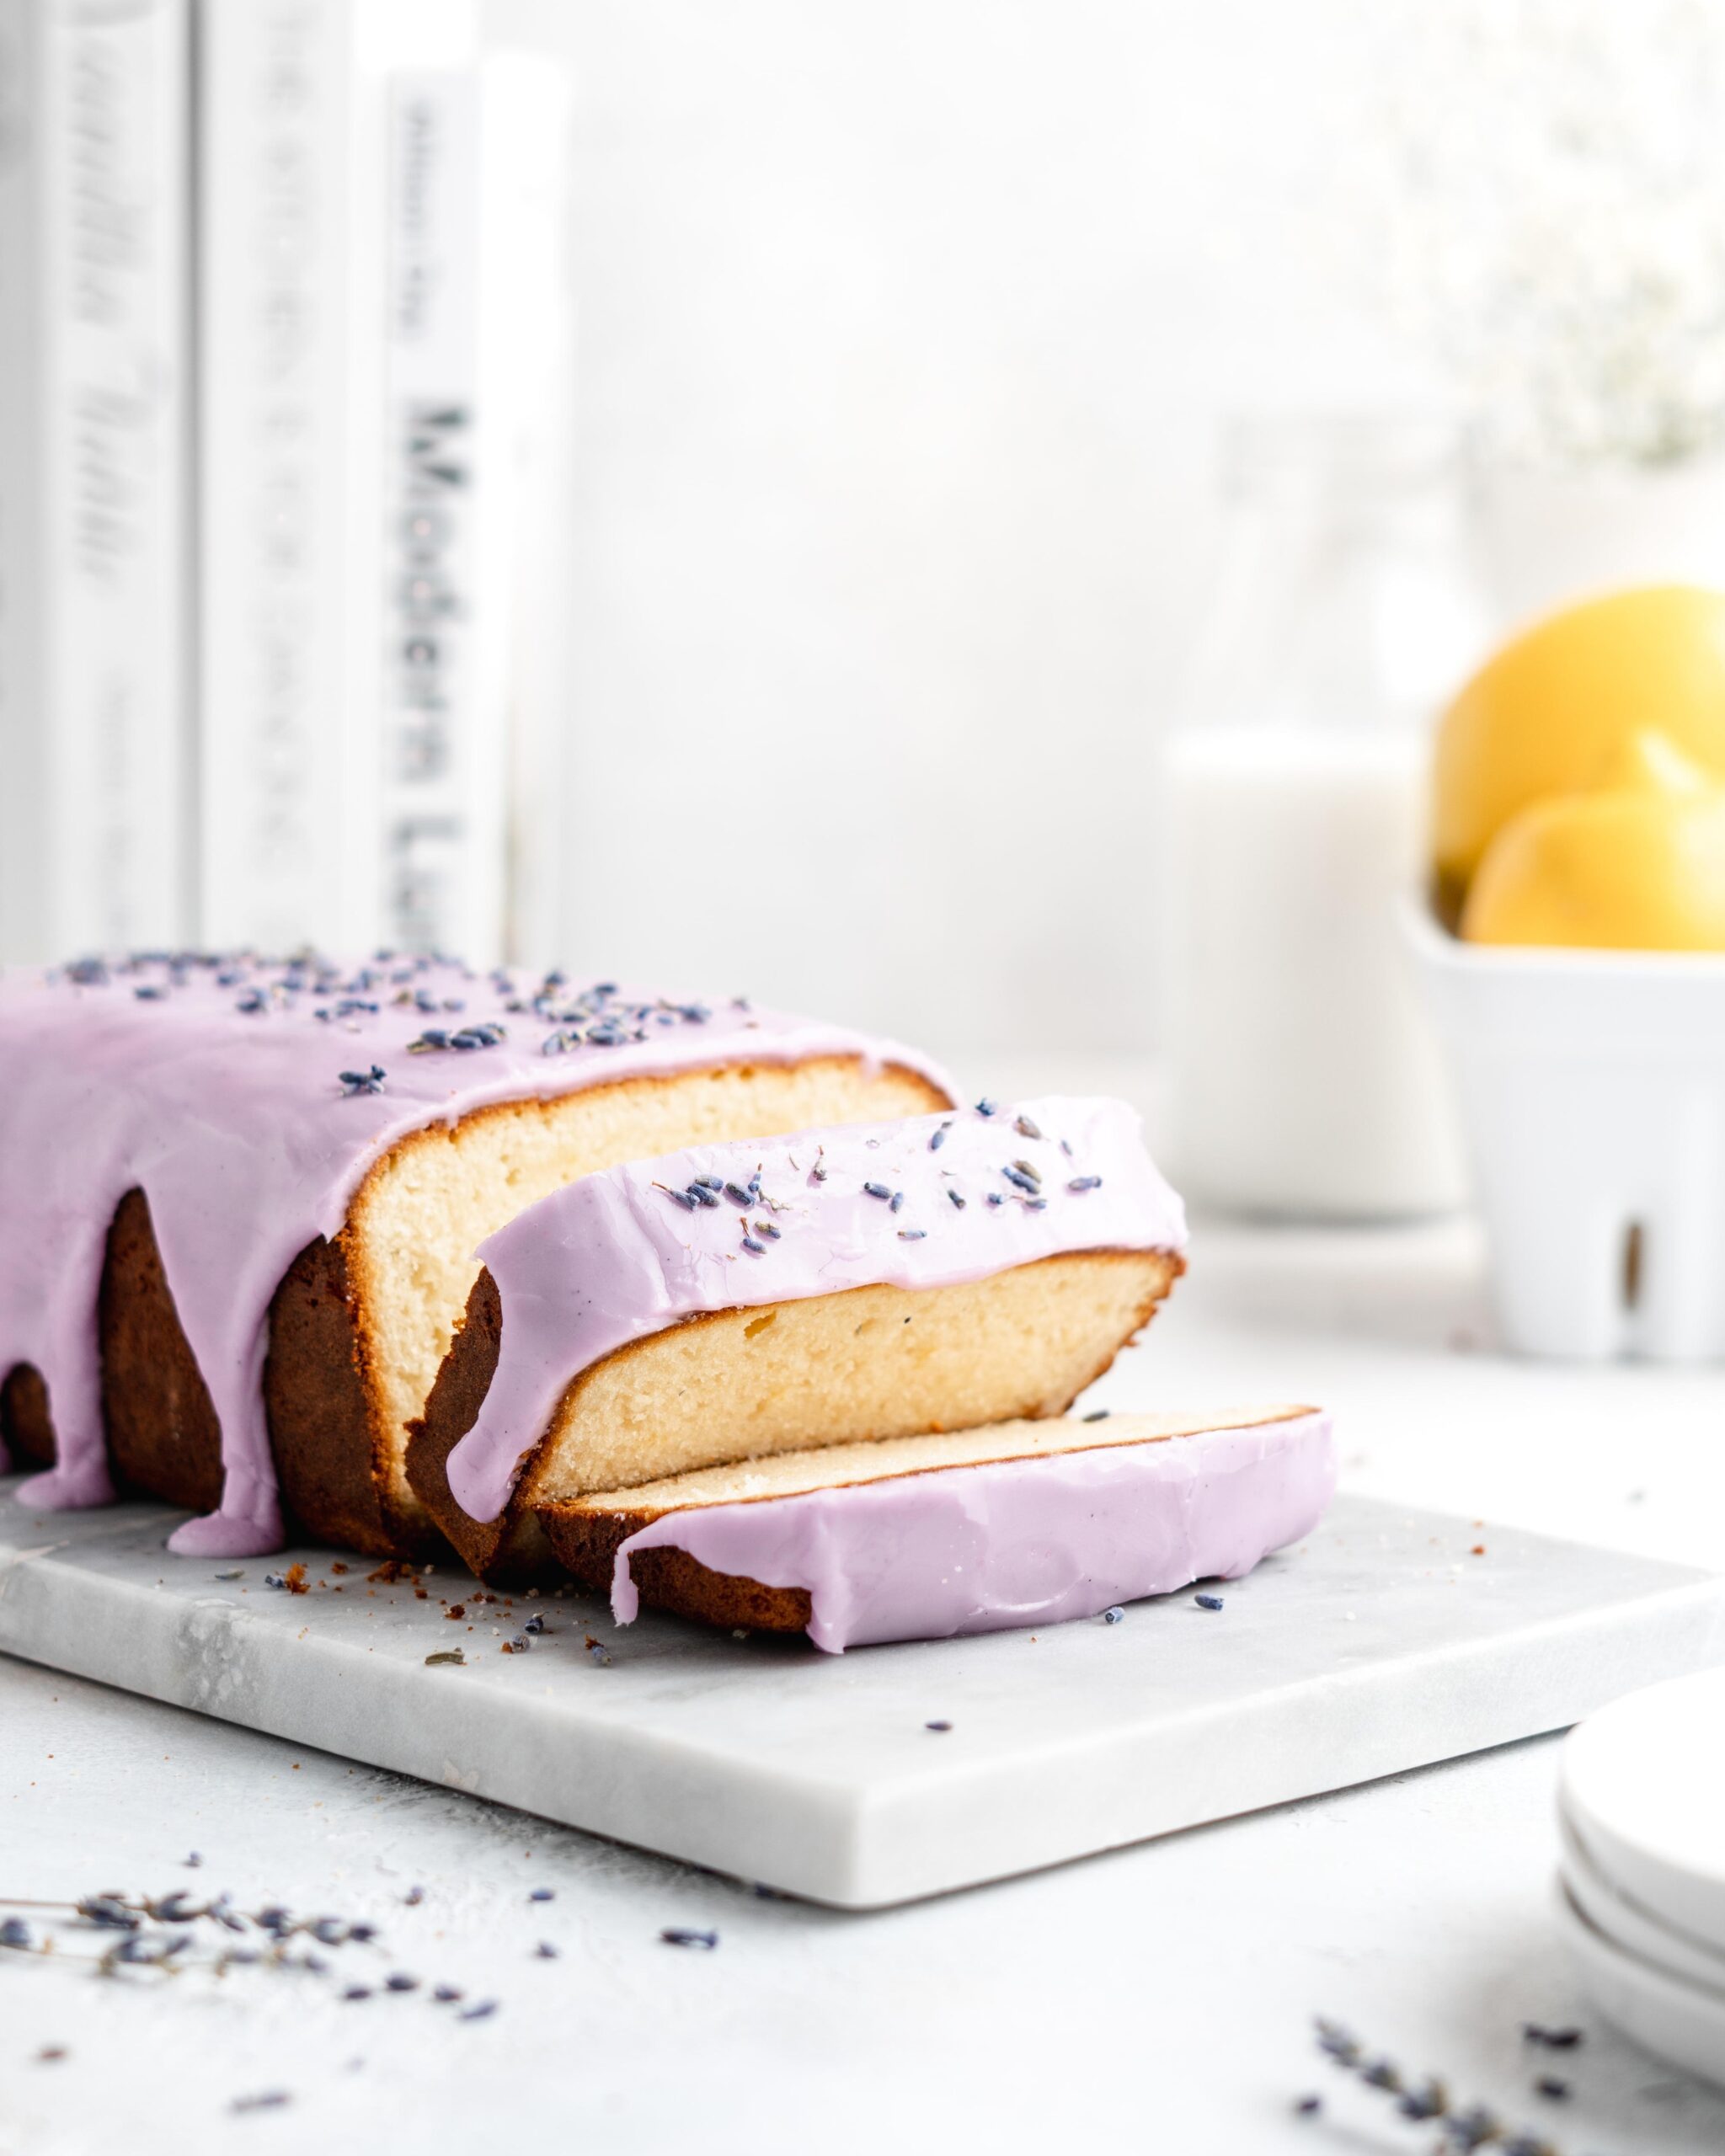  Indulge in a rich, buttery pound cake infused with the delicate flavors of lavender and lemon